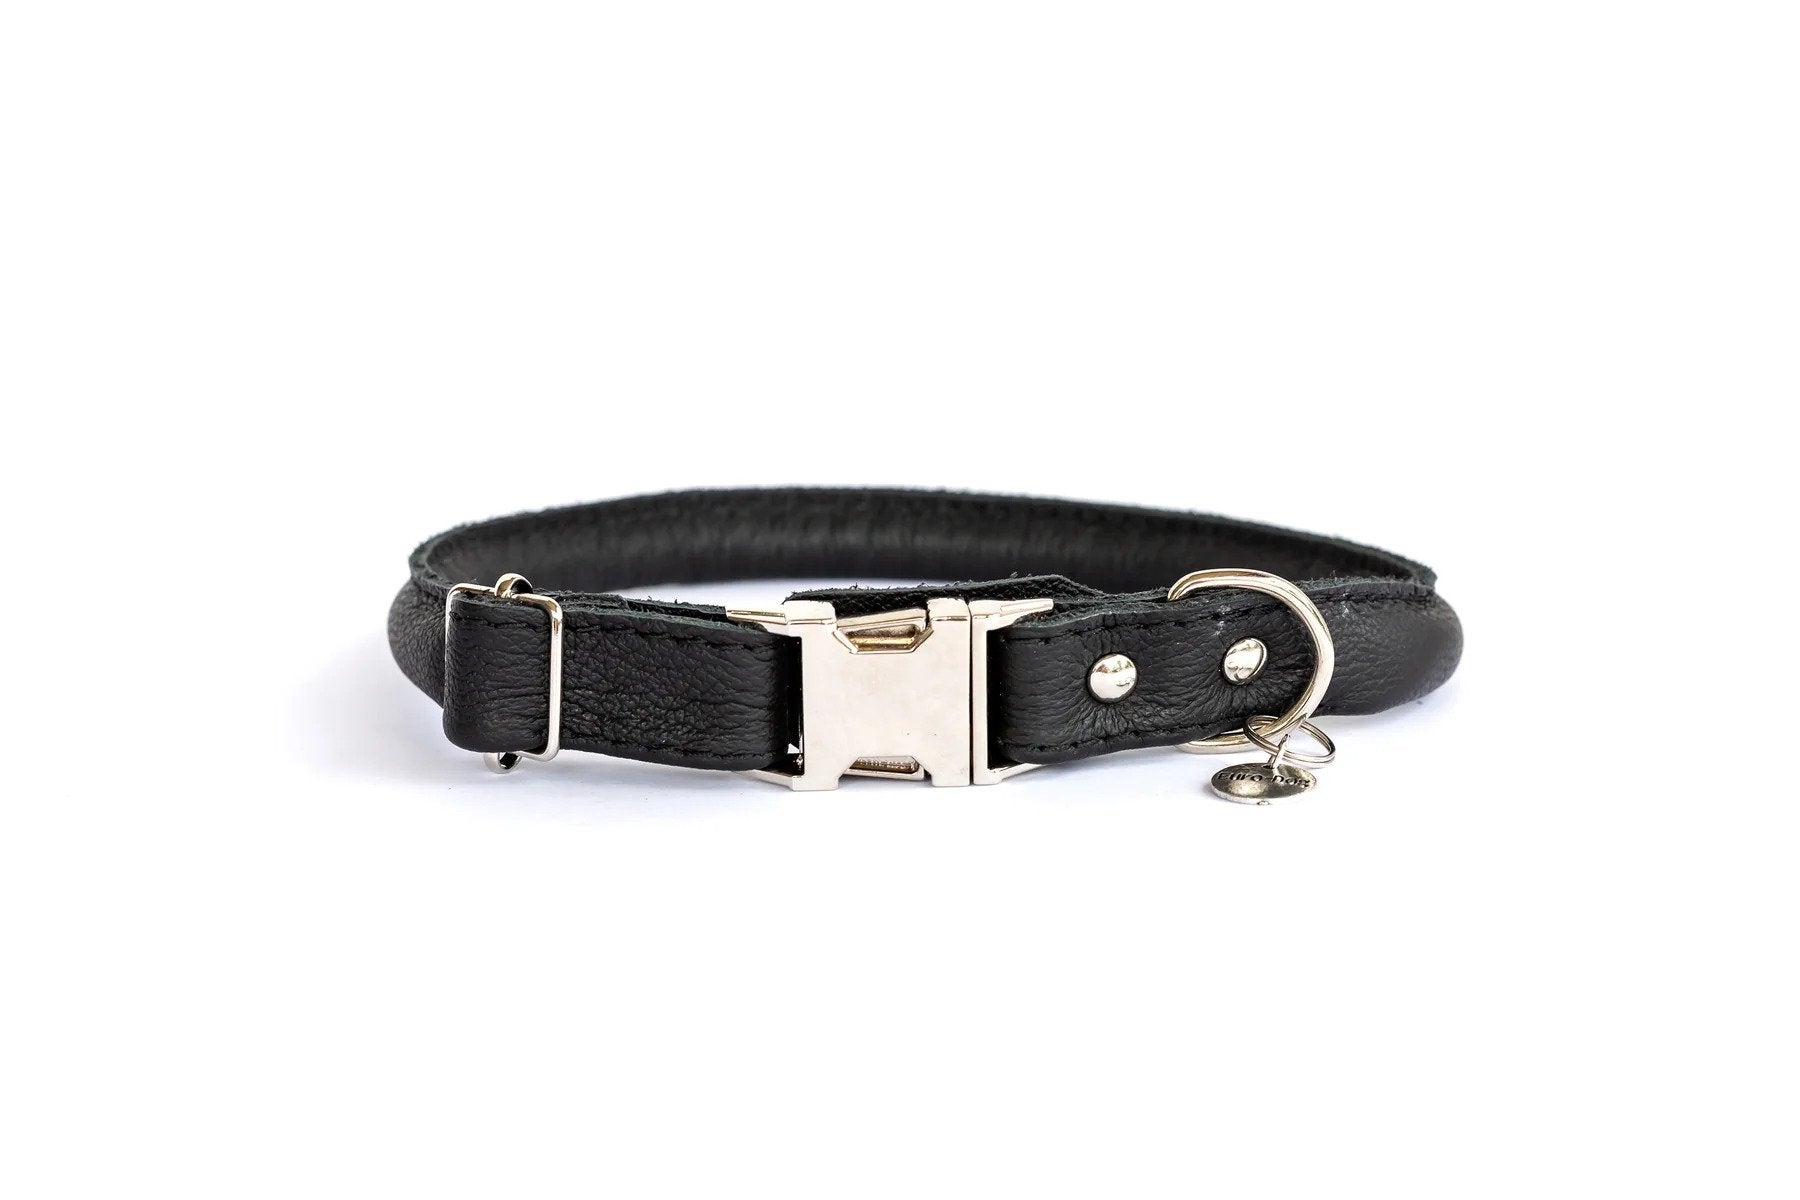 Eurodog Collars Soft Rolled Leather Quick Release Buckle Dog Collar Very Soft Black Leather